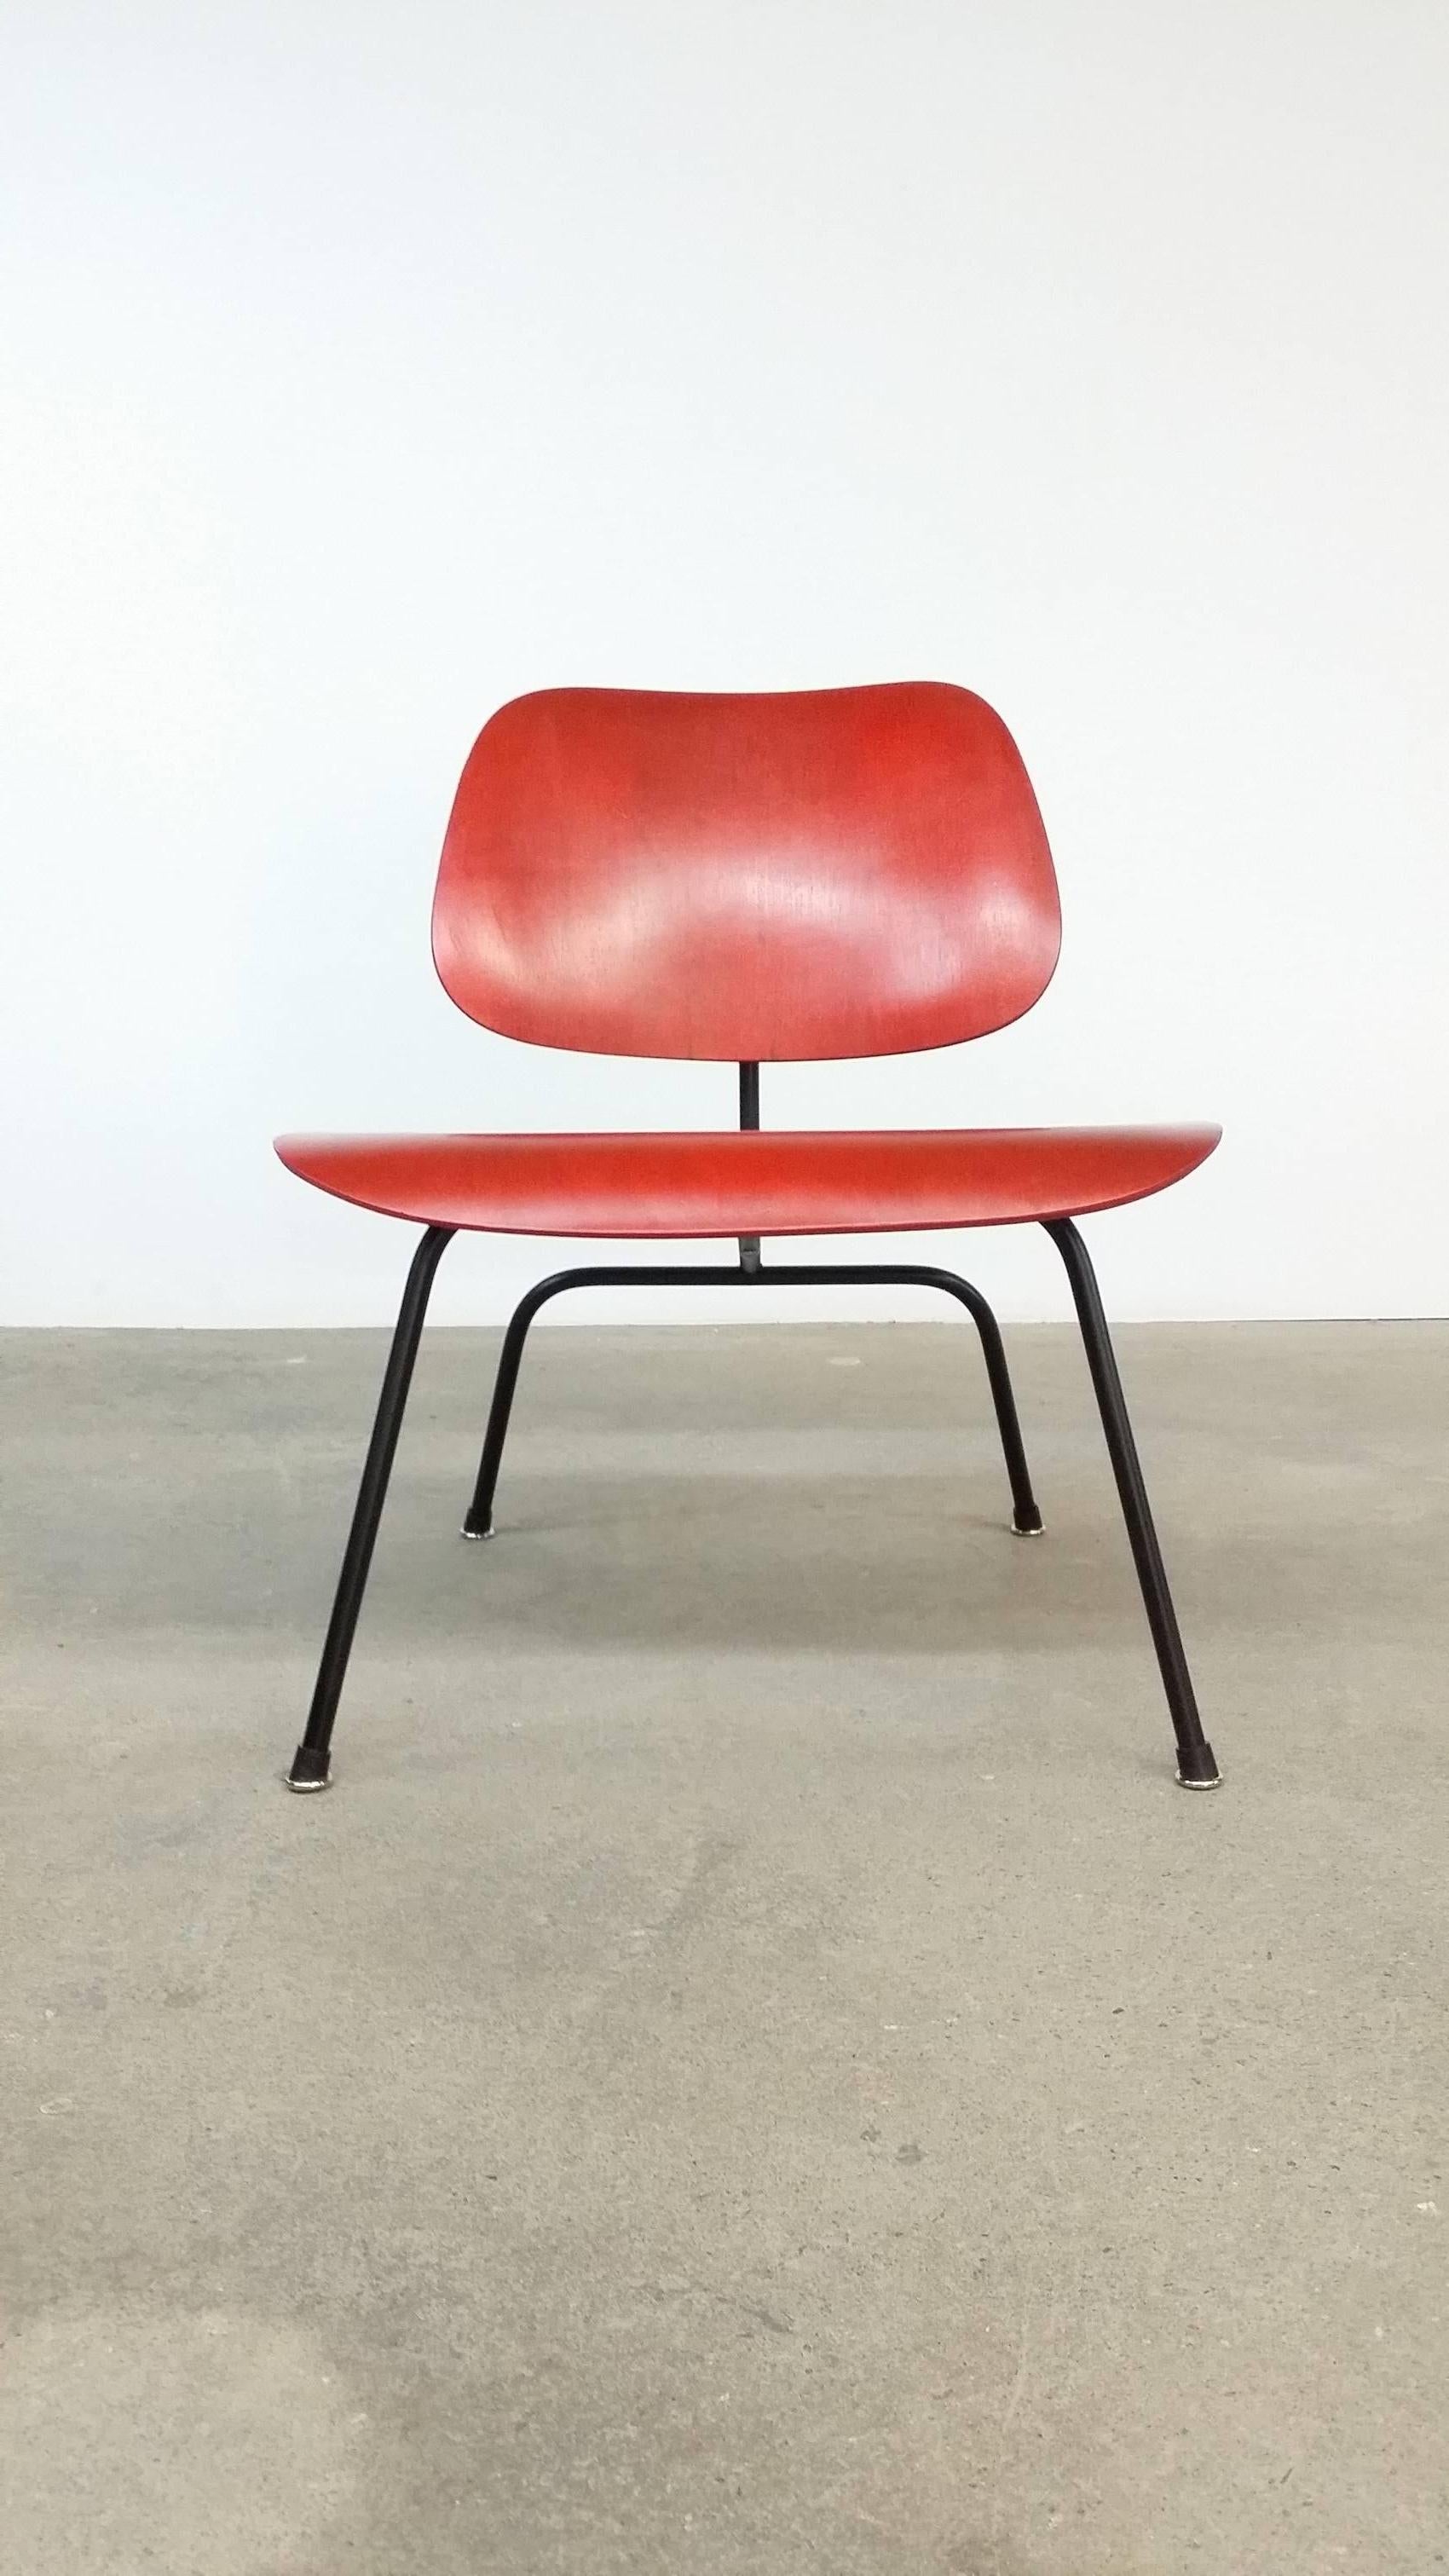 Fully Restored Early Red Aniline Dye Eames LCM 1